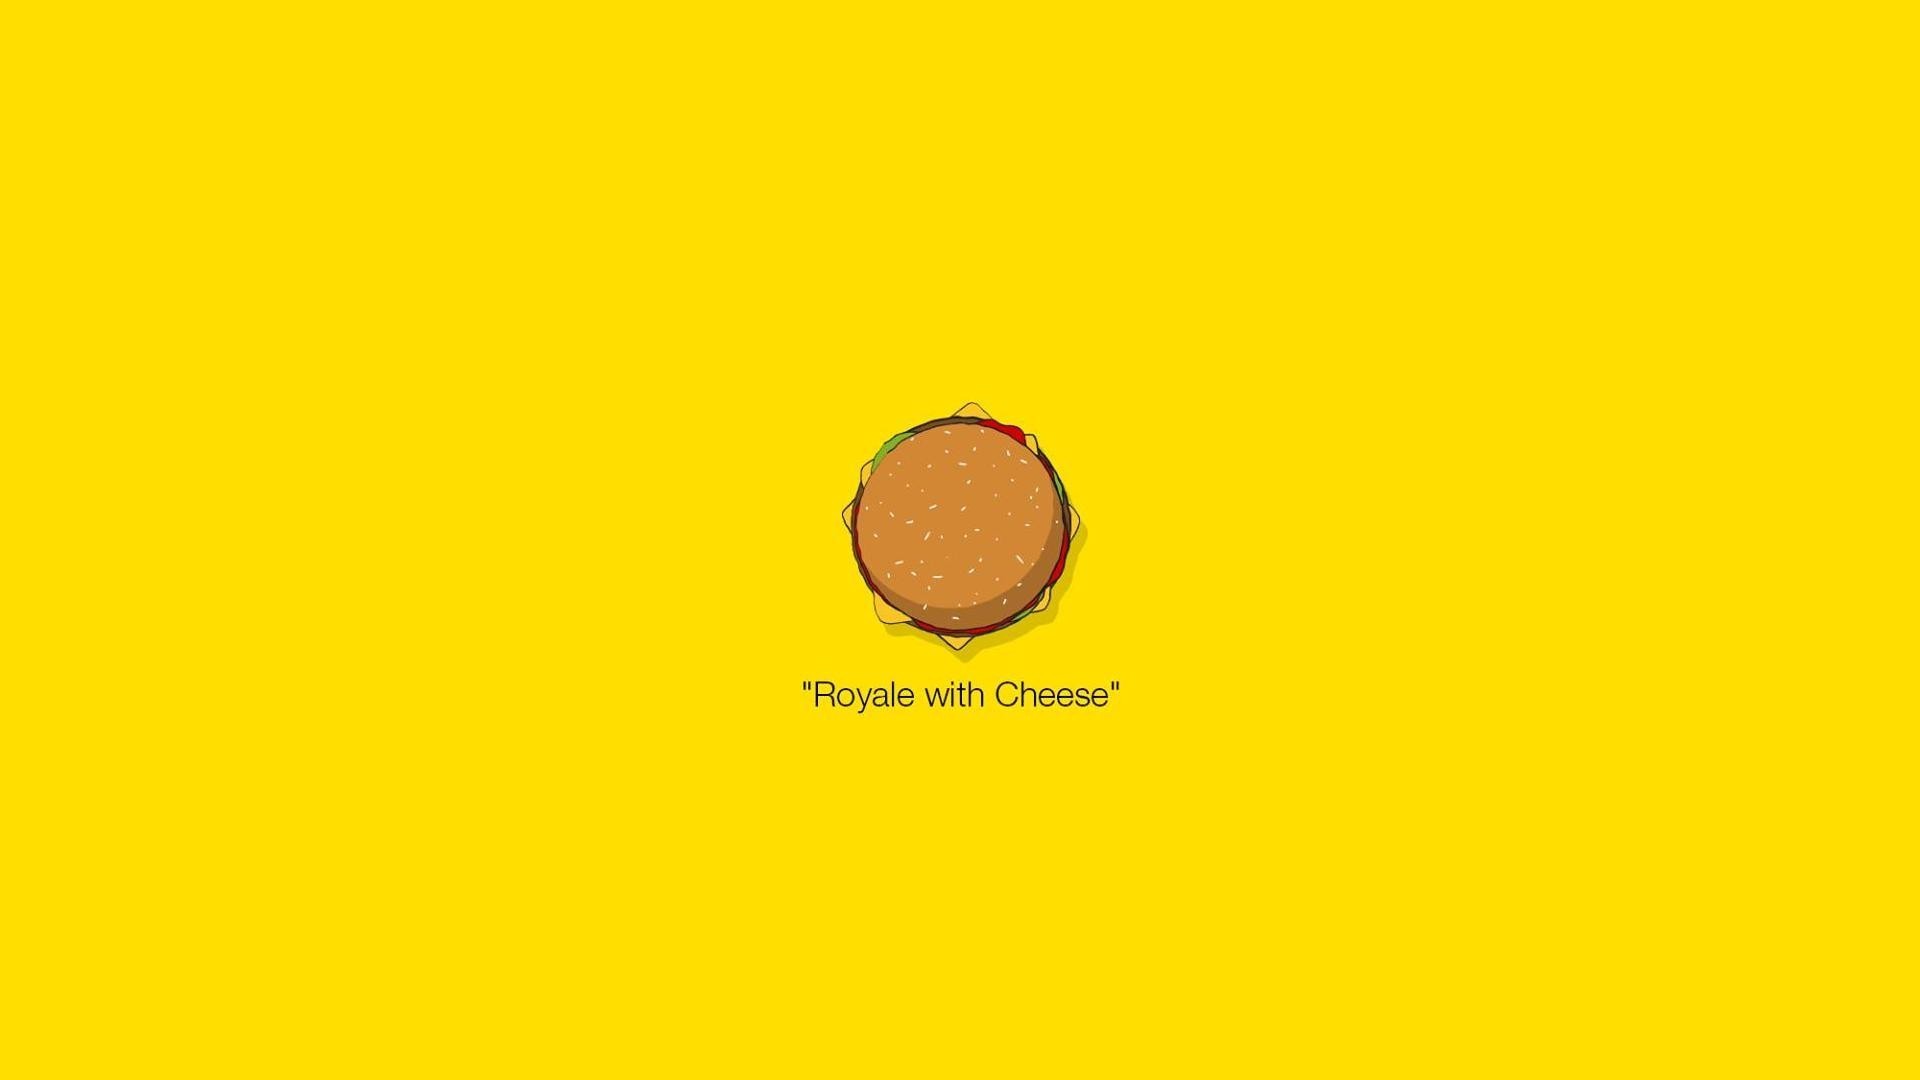 General 1920x1080 Pulp Fiction minimalism yellow background movies burgers